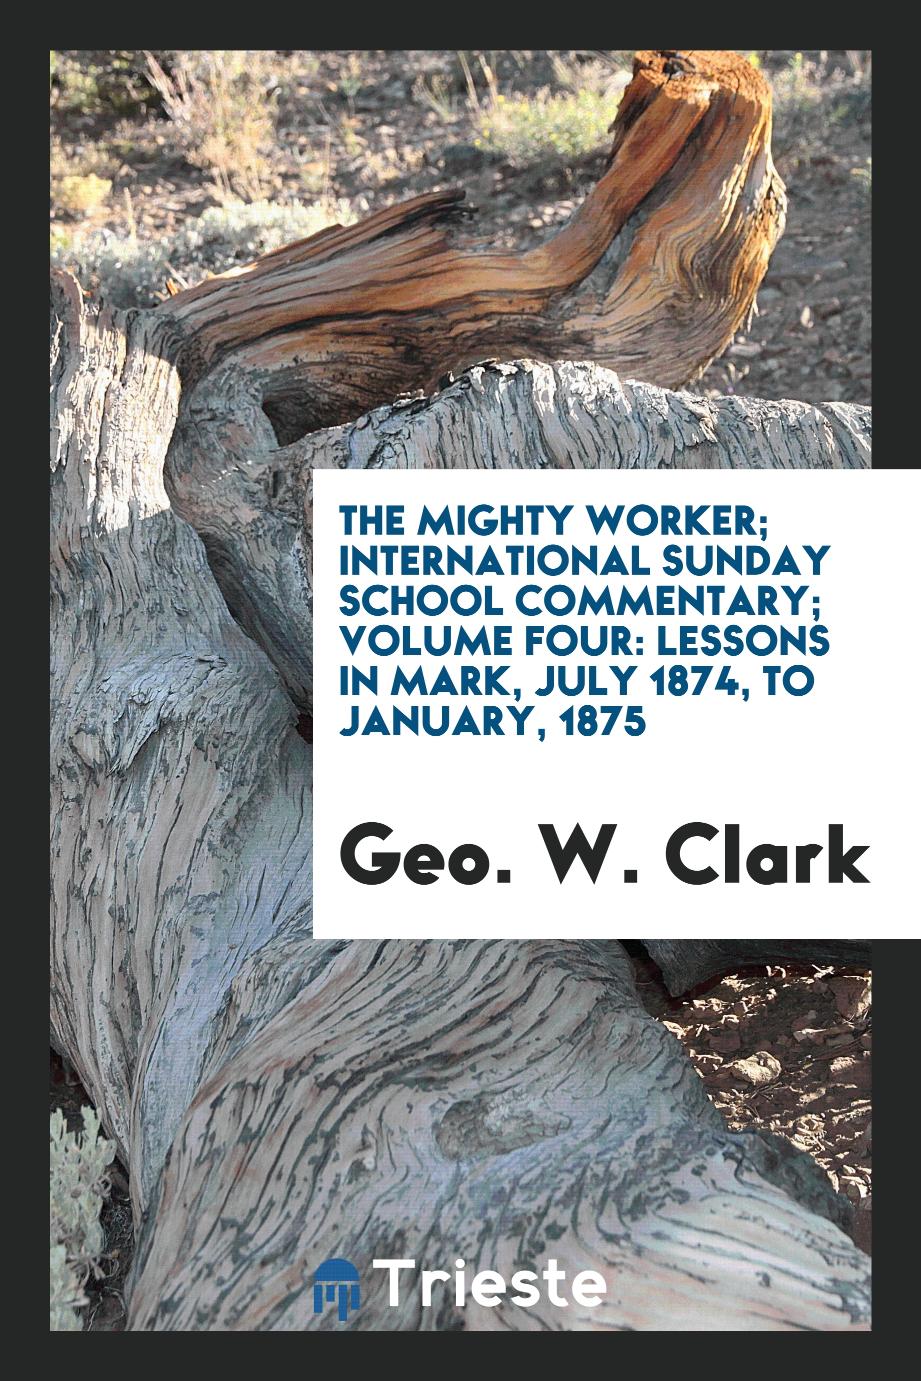 The Mighty Worker; International Sunday School Commentary; Volume Four: Lessons in Mark, July 1874, to January, 1875